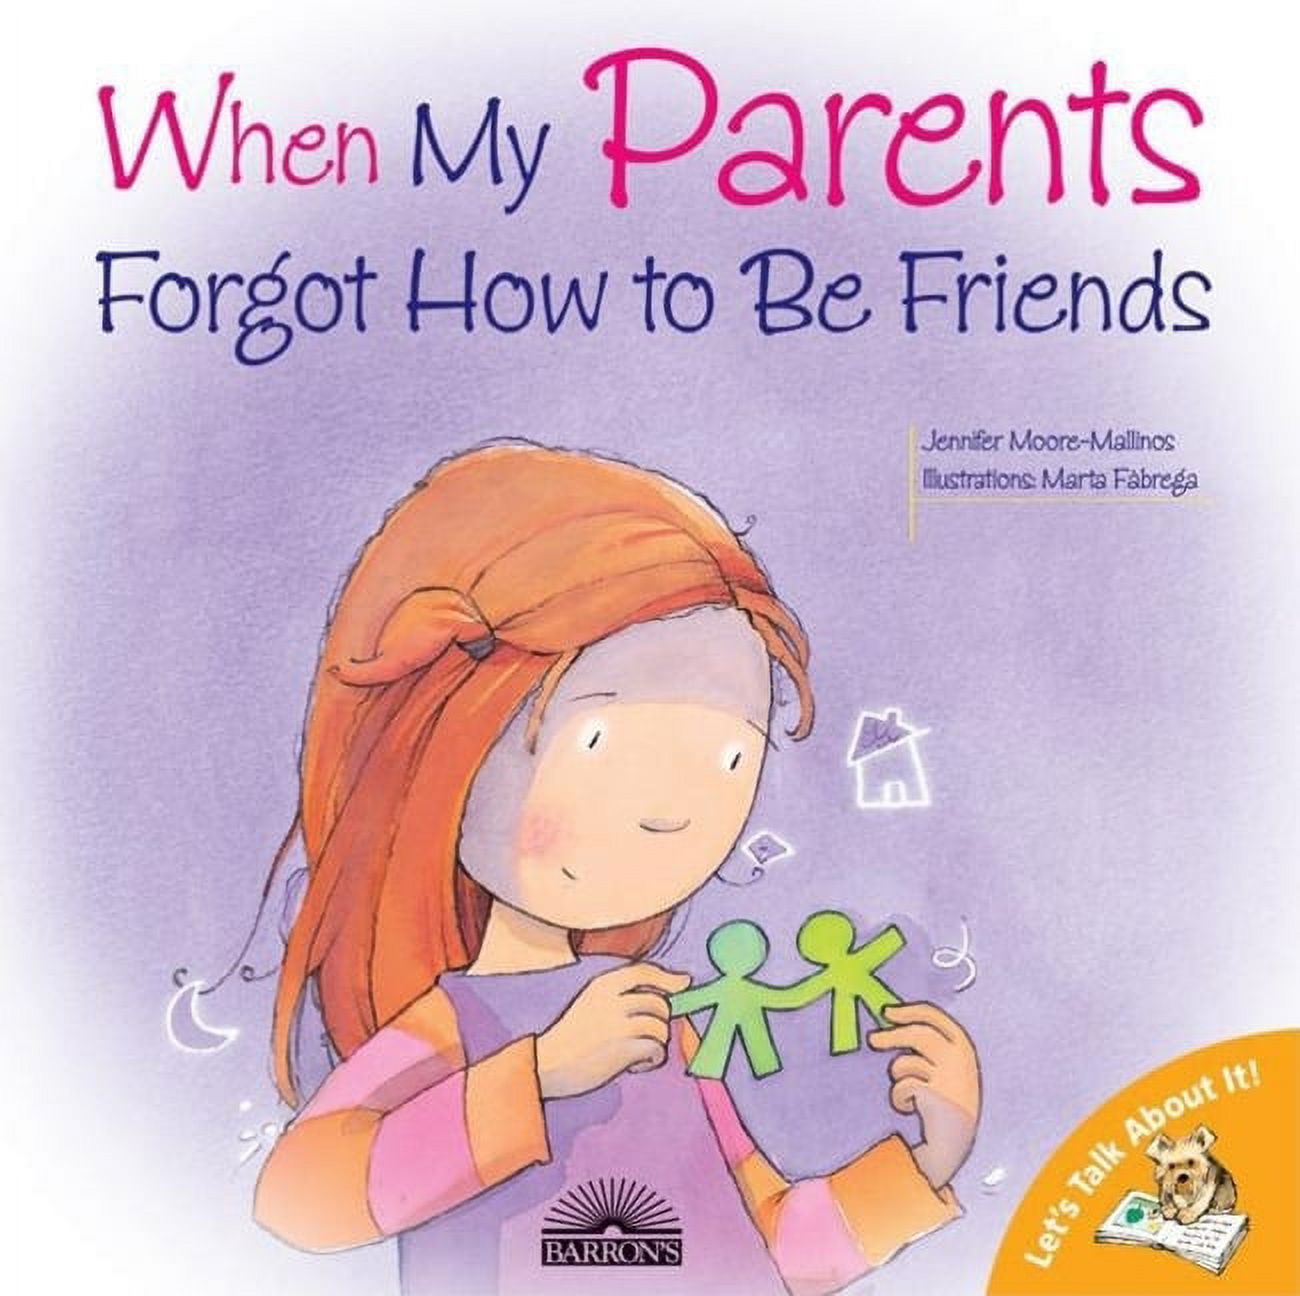 Let's Talk about It!: When My Parents Forgot How to Be Friends